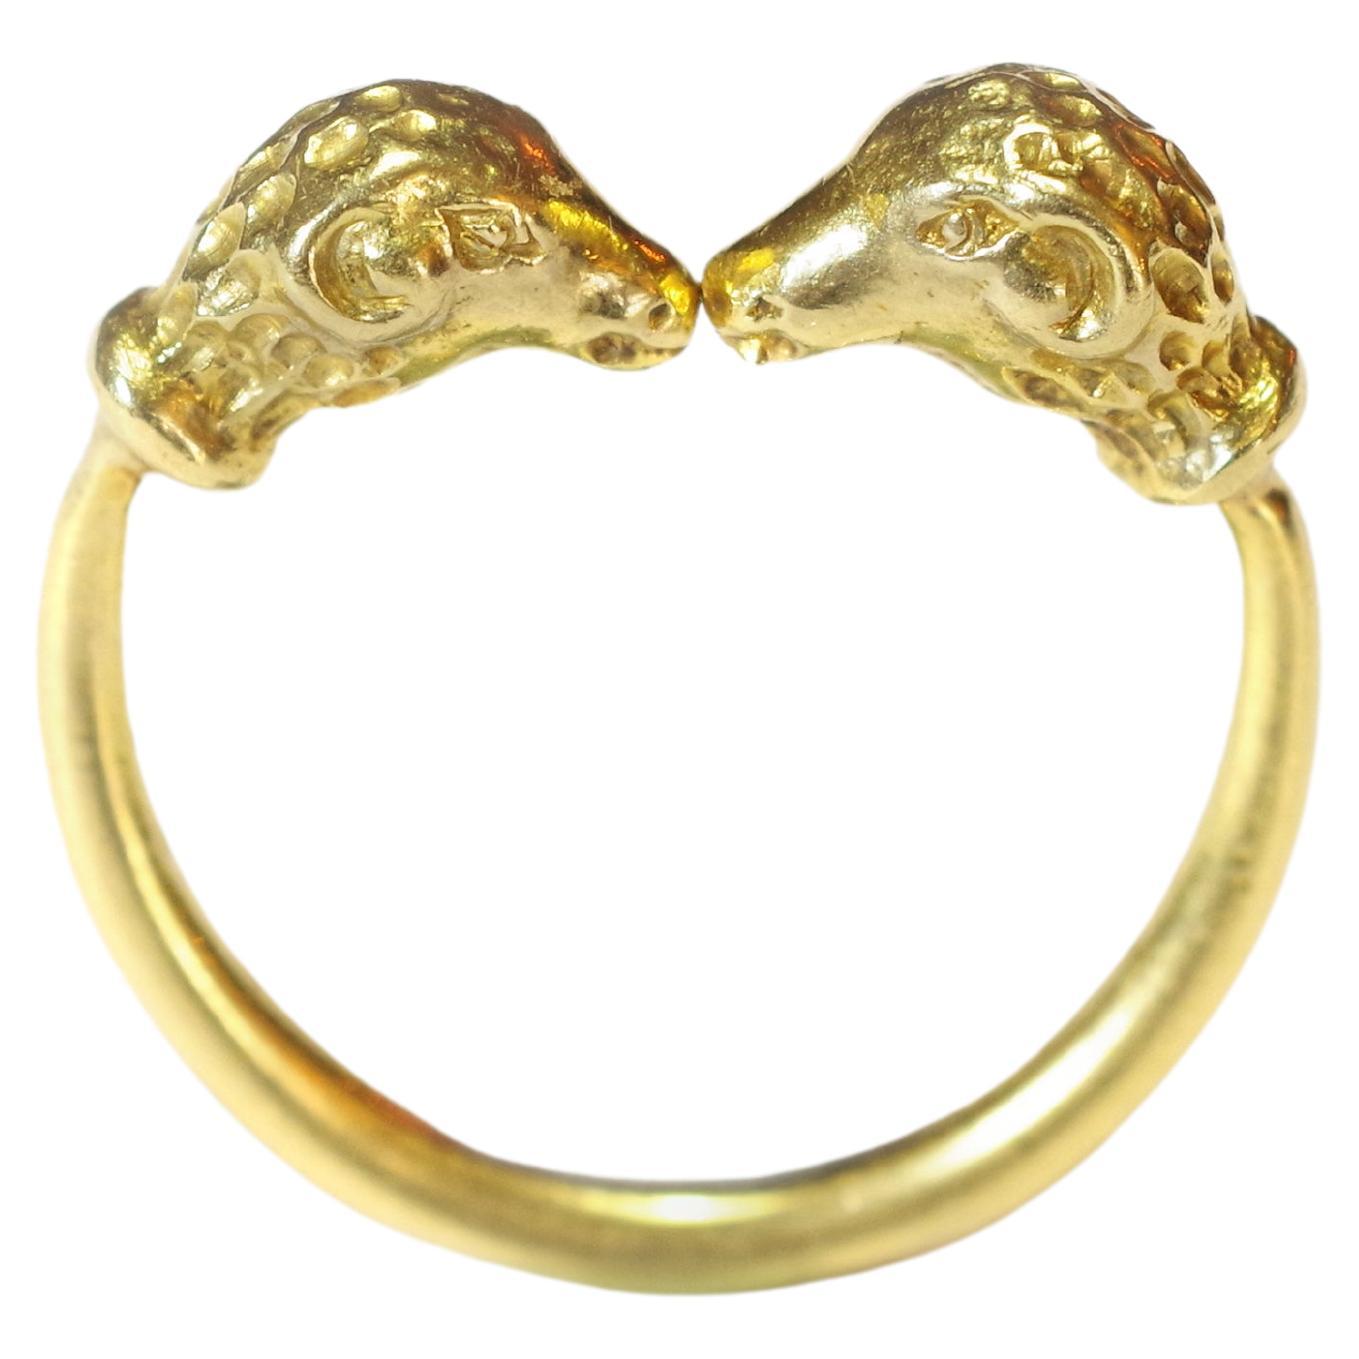 Rams Head Gold Ring in 18k Gold, Torque Ring